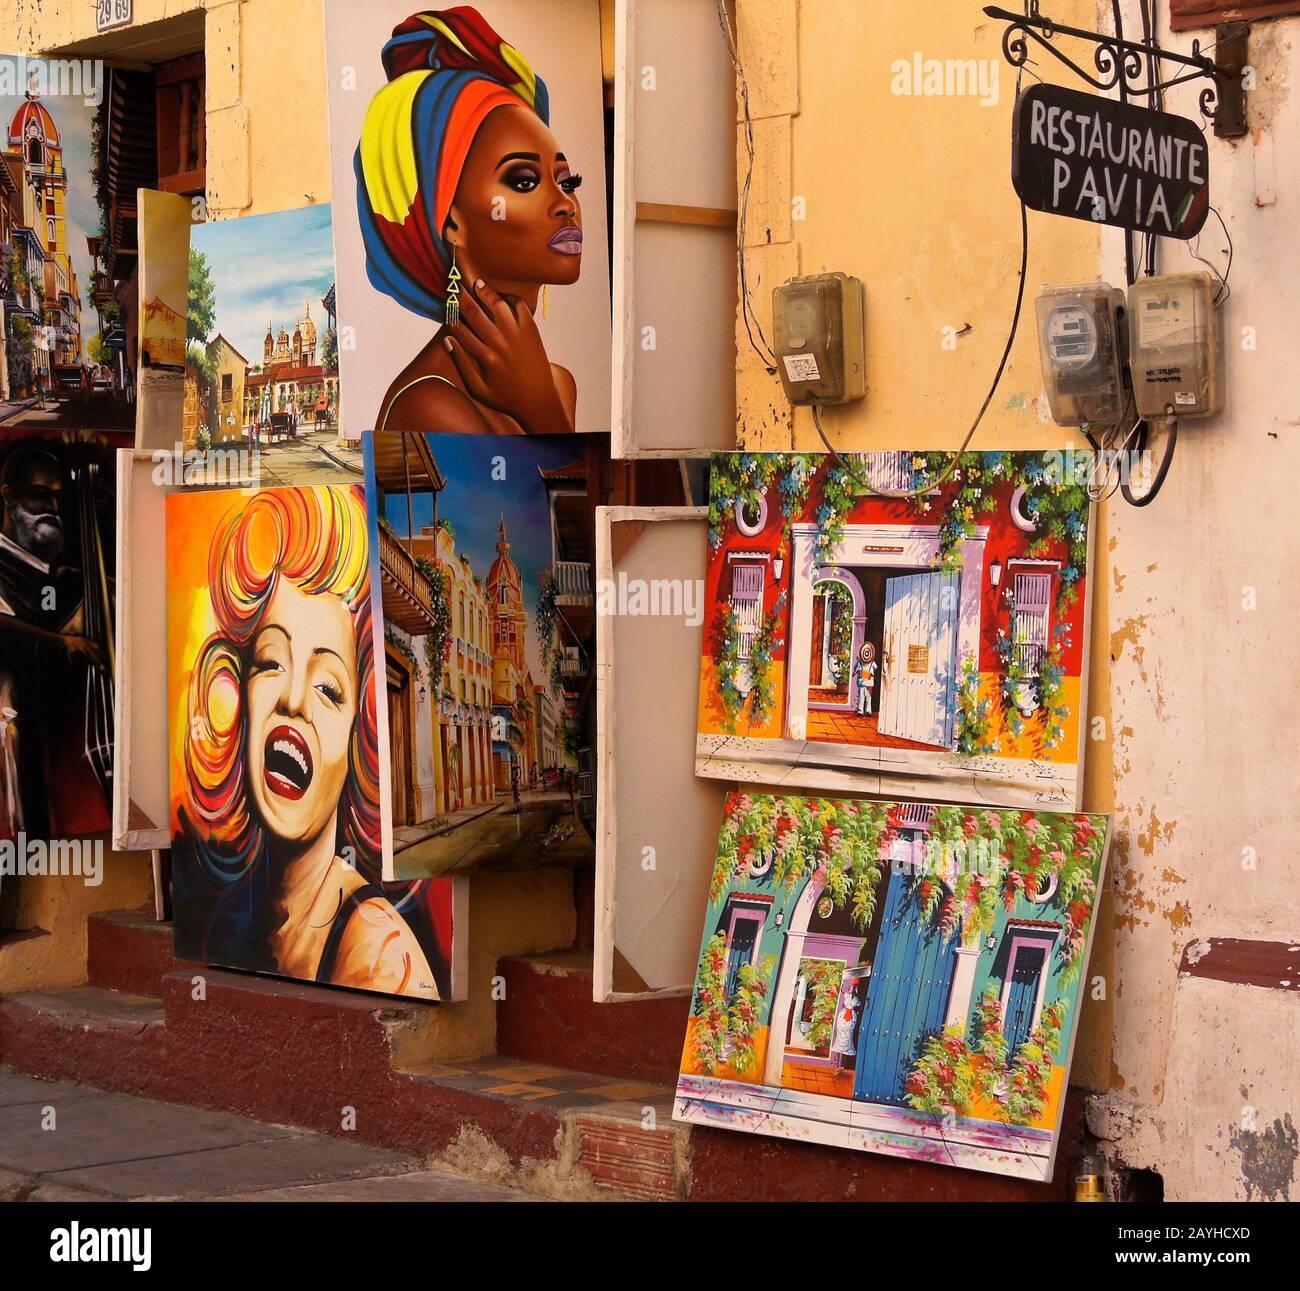 Colorful paintings displayed for sale outside an art gallery and restaurant in Getsemani, Cartagena, Colombia Stock Photo